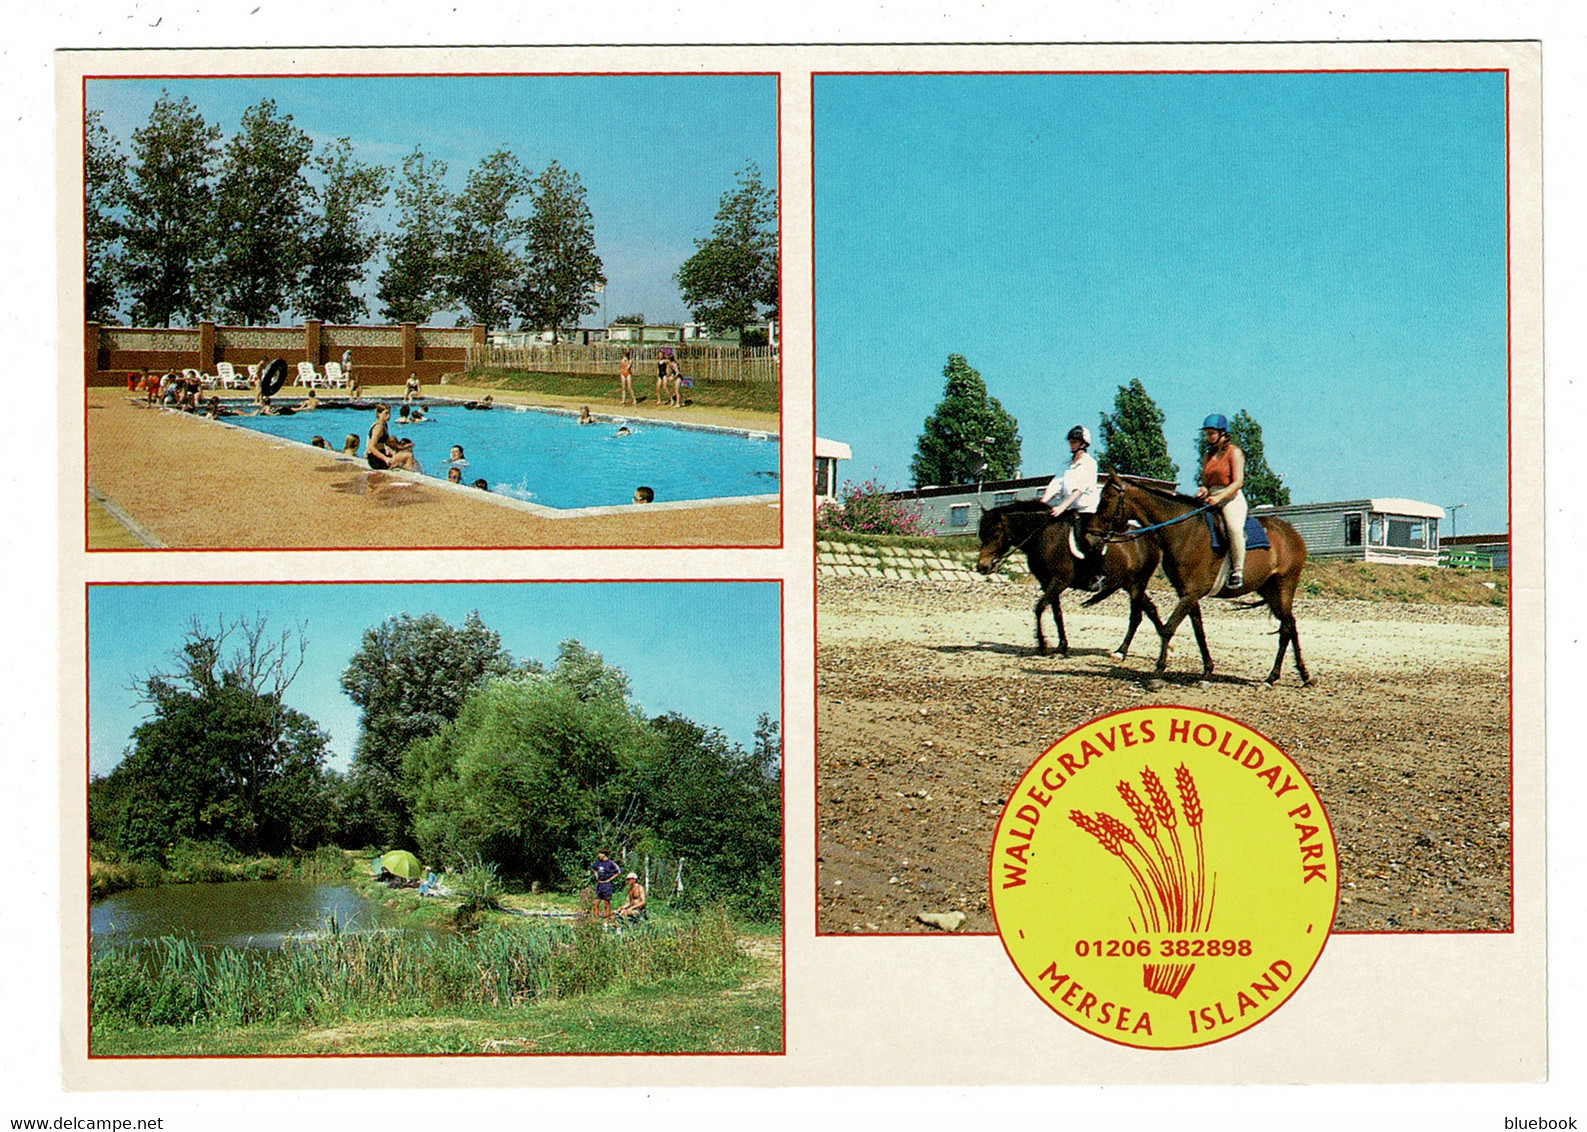 Ref 1444 - 2003 Postcard - Waldegraves Holiday Park - Mersea Island Colchester Essex - Colchester